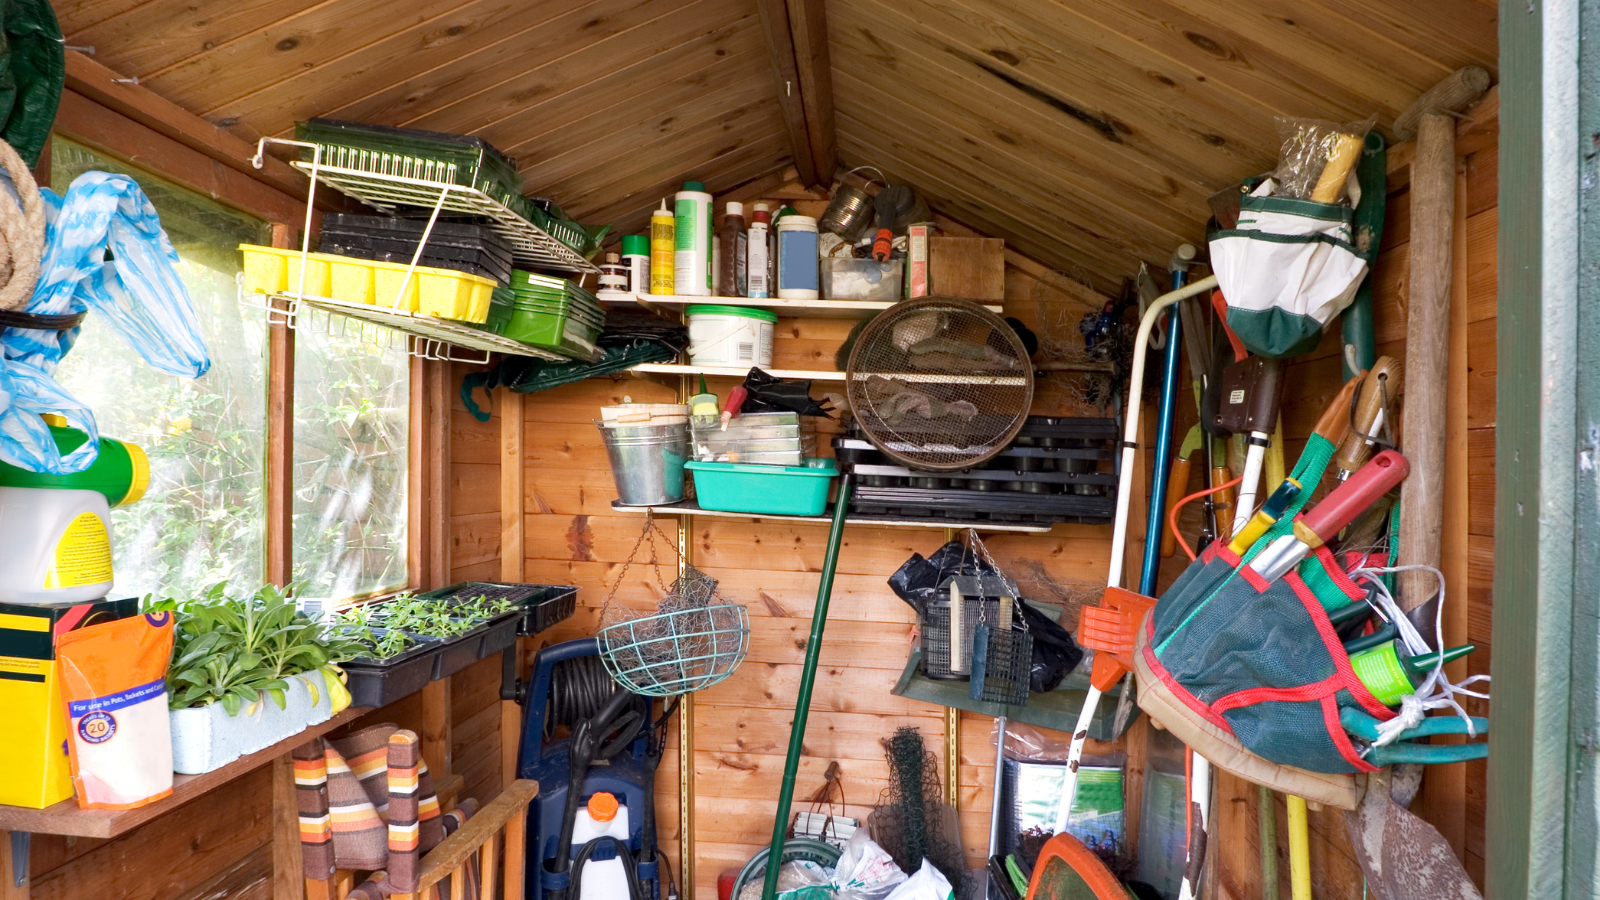 Inside of a shed with tools, chairs and gardening equipment